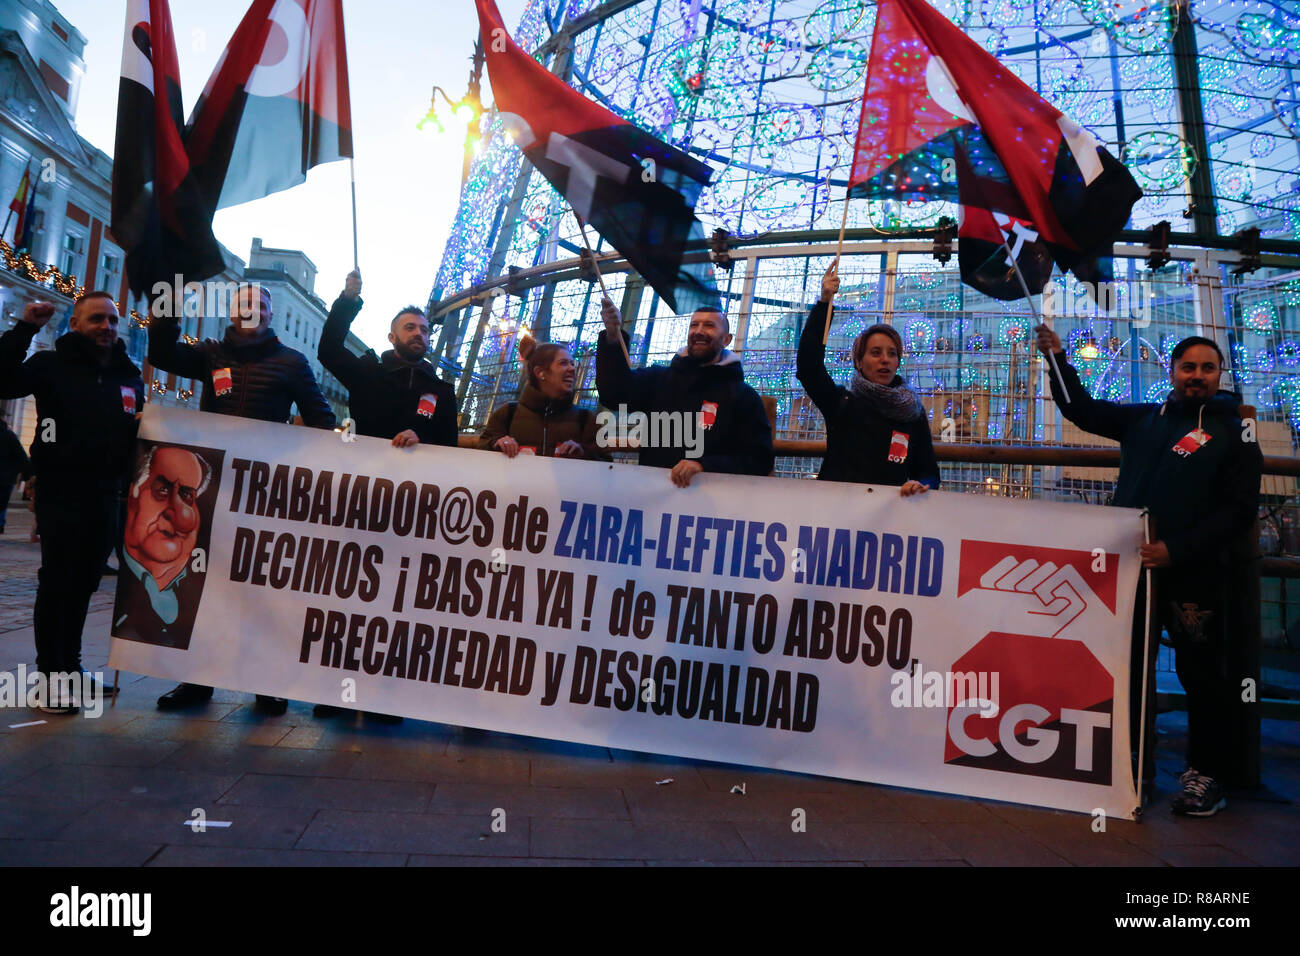 Madrid, Spain. 14th Dec, 2018. Workers from Zara and Lefties (Grupo  Inditex) seen protesting against job insecurity and inequality.Workers from  various active strikes such as Carrefour, Inditex, Amazon or teleoperators  in Spain